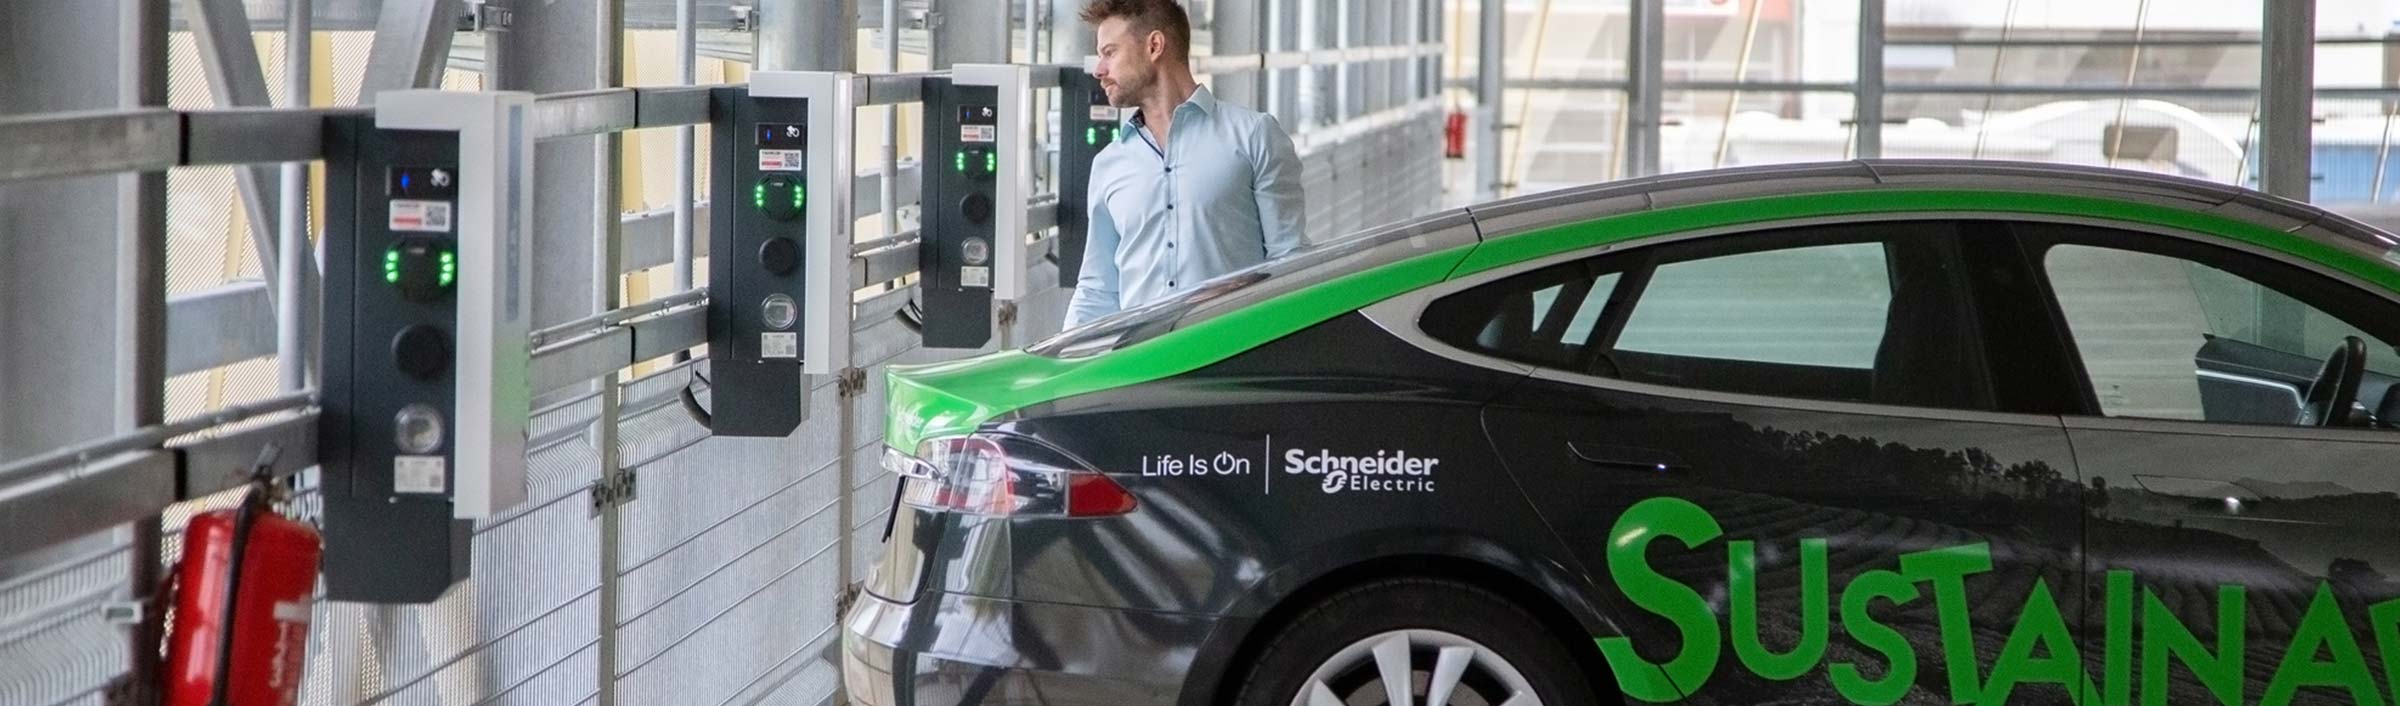 Sustainability Schneider Electric GmbH Tesla with EV Link chargers and SE employee